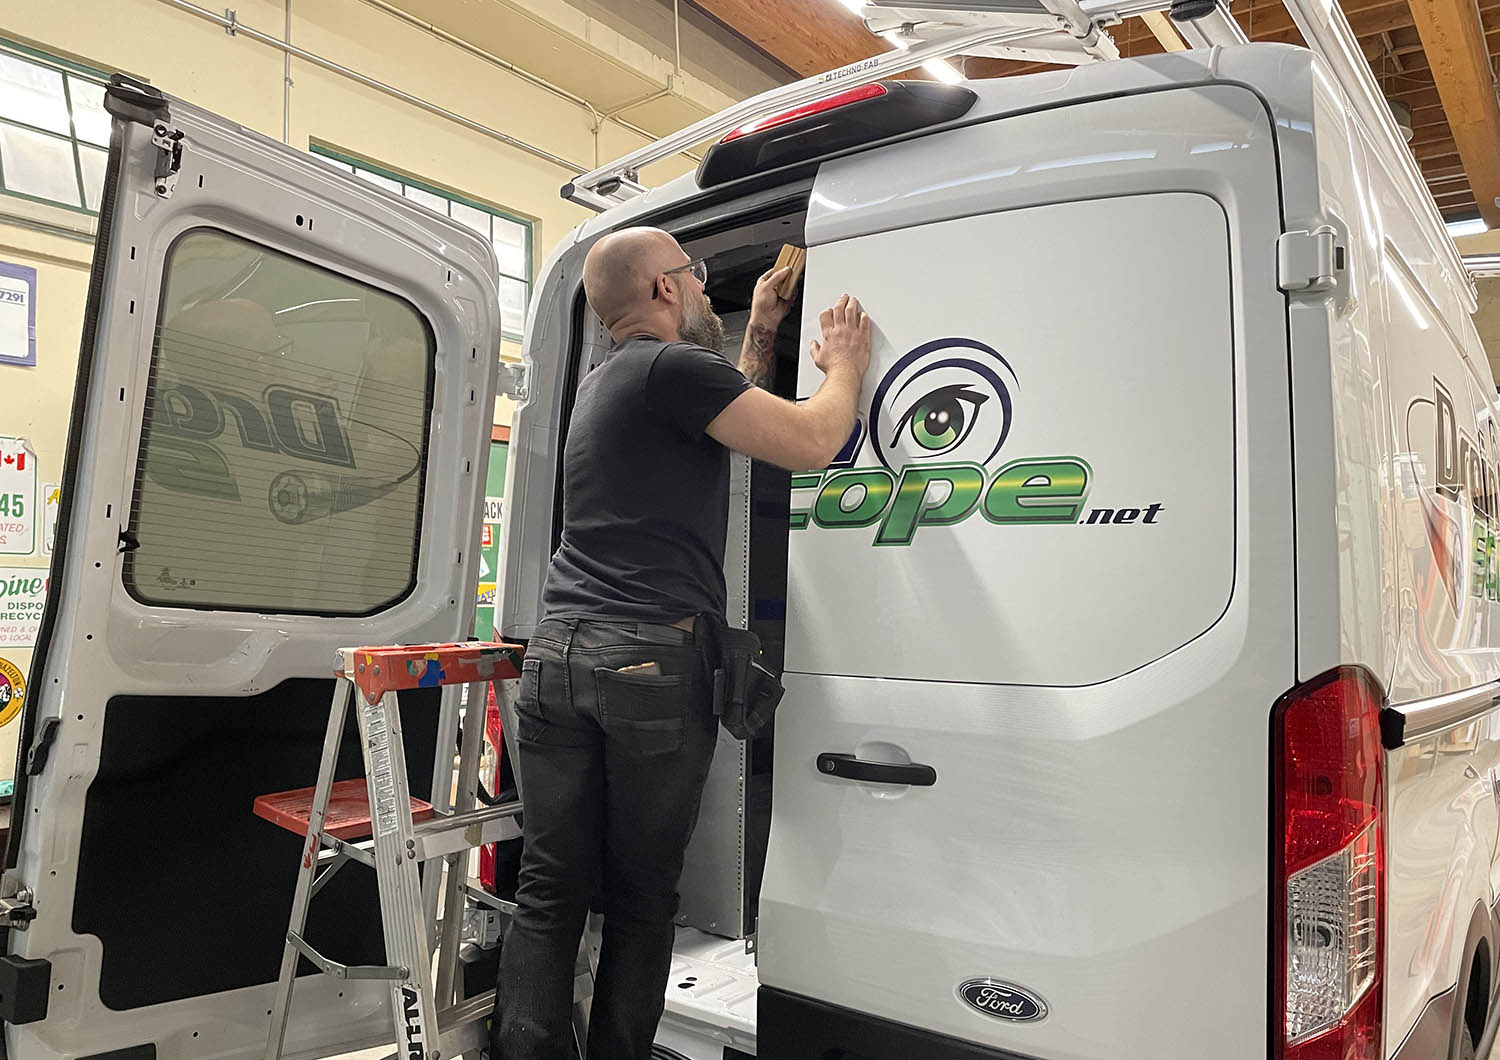 Worker applying a vinyl decal to the back of a white vehicle